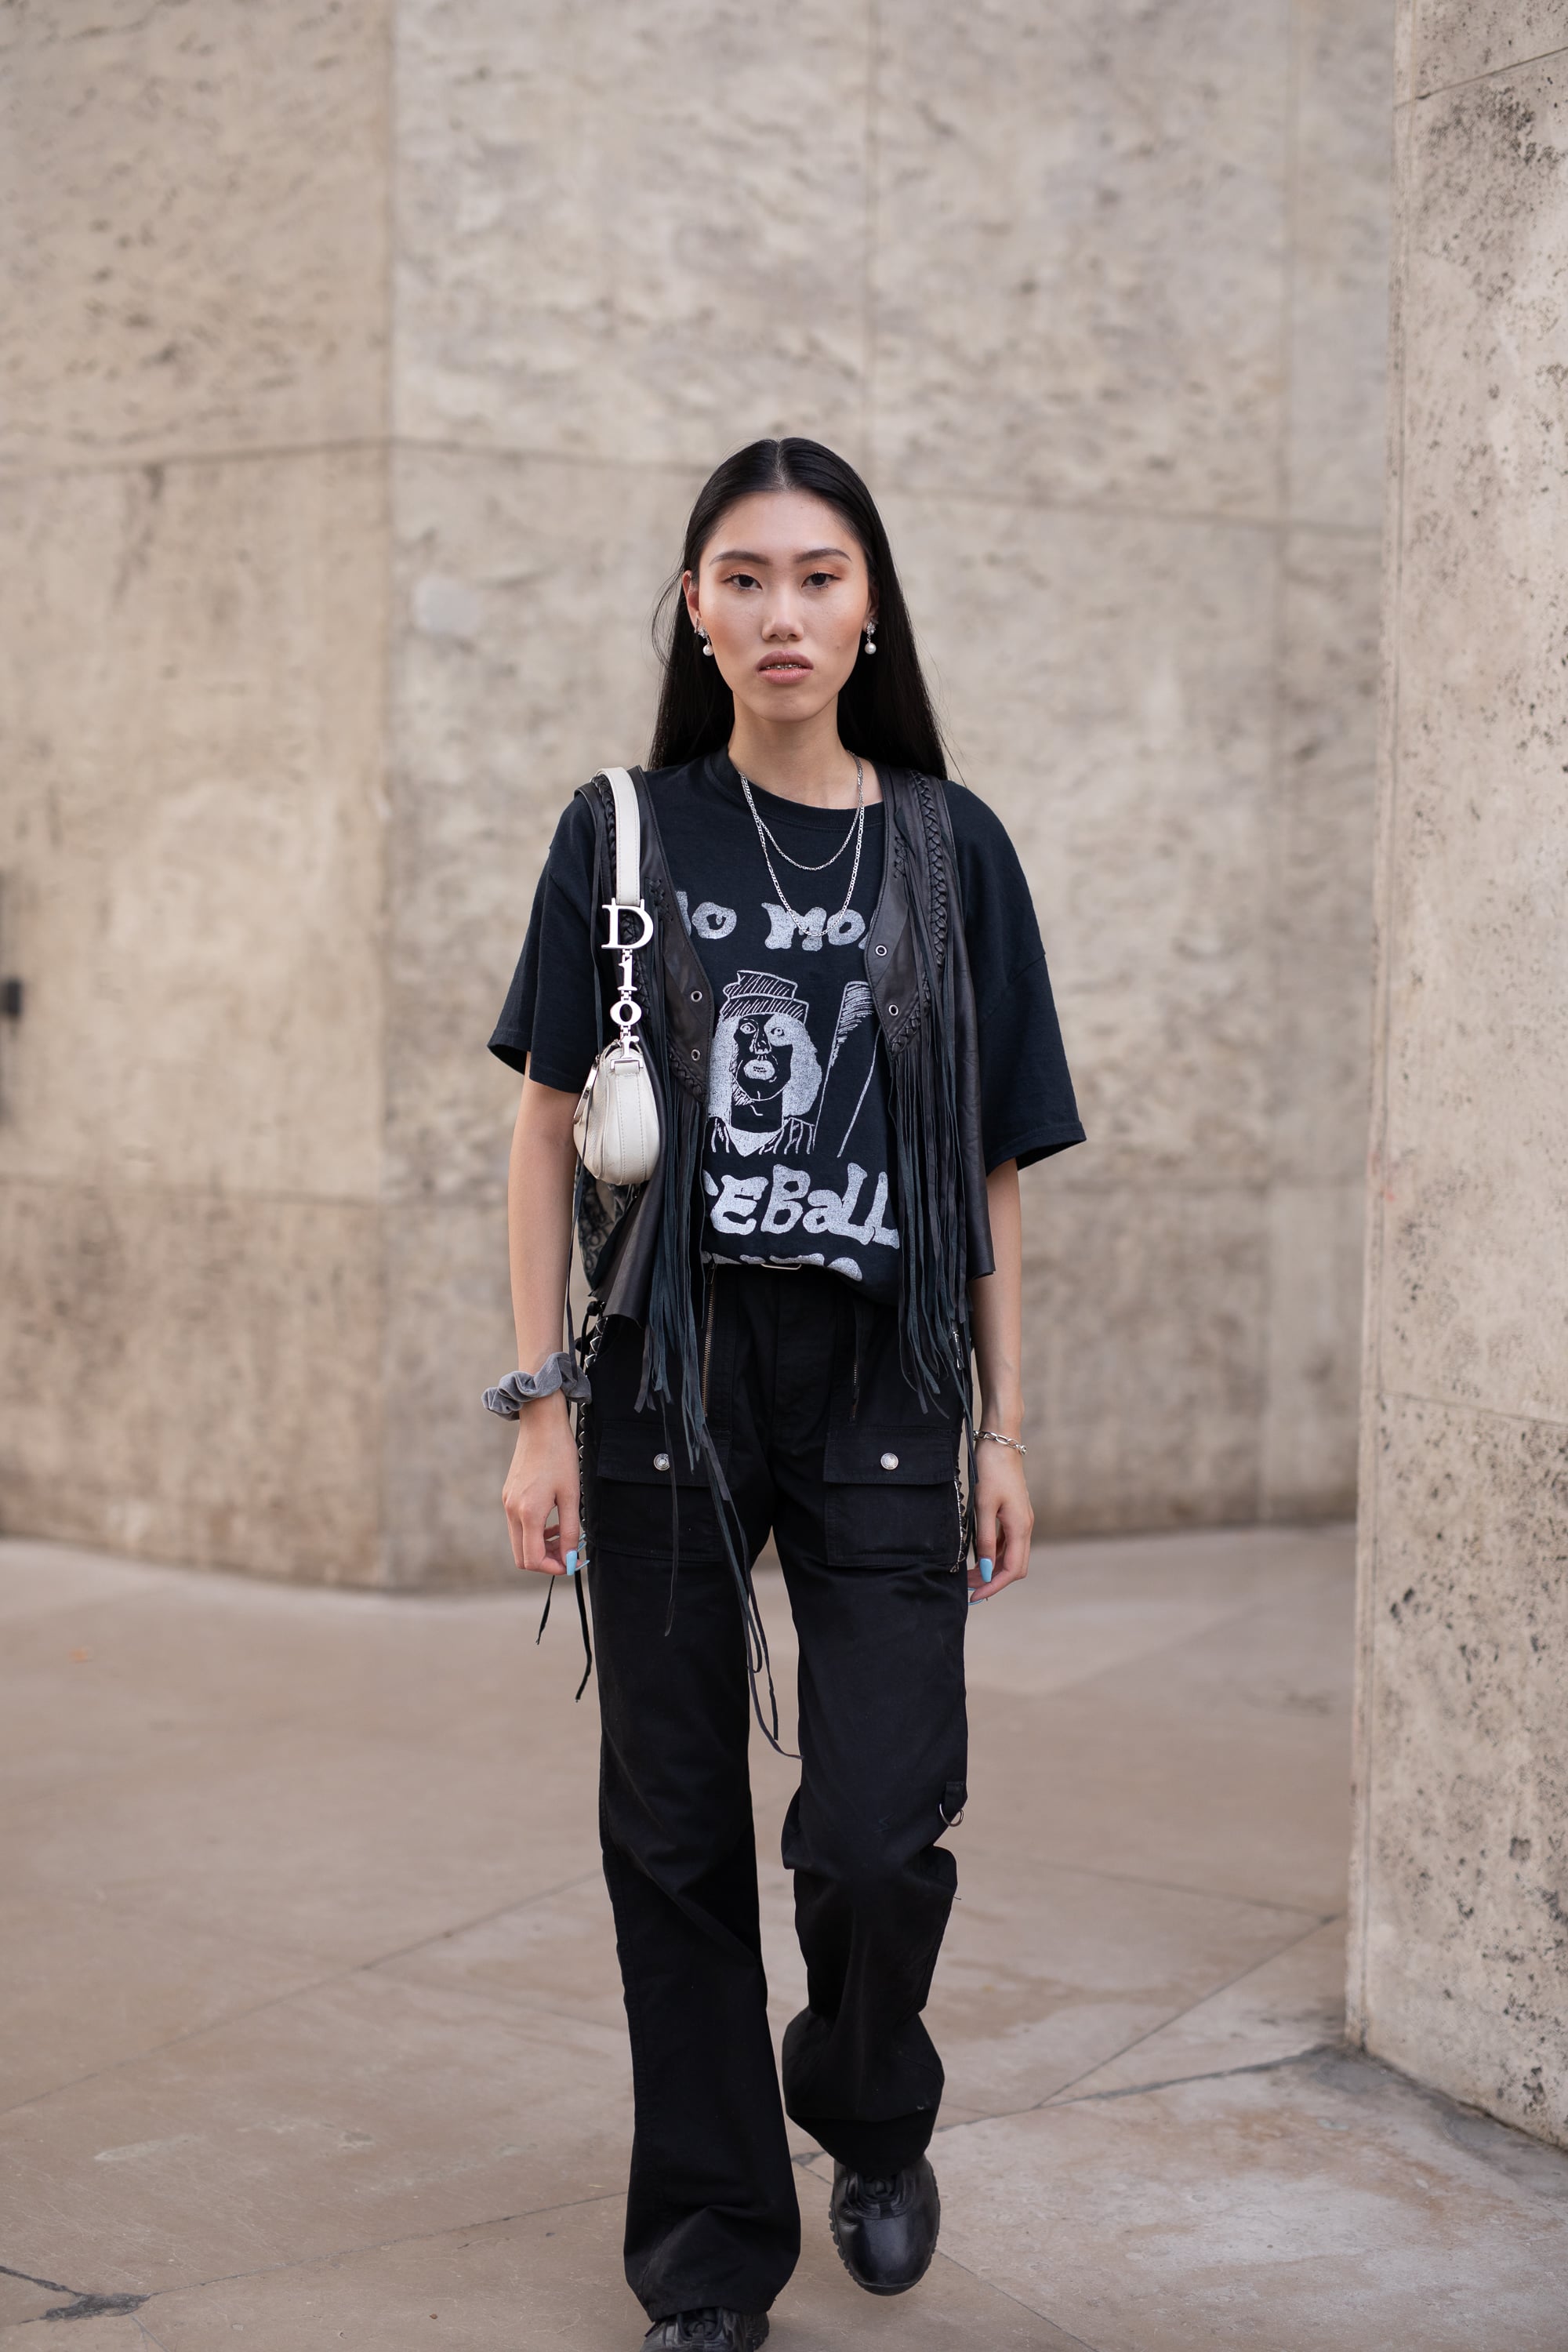 Buy > utility pants outfit > in stock